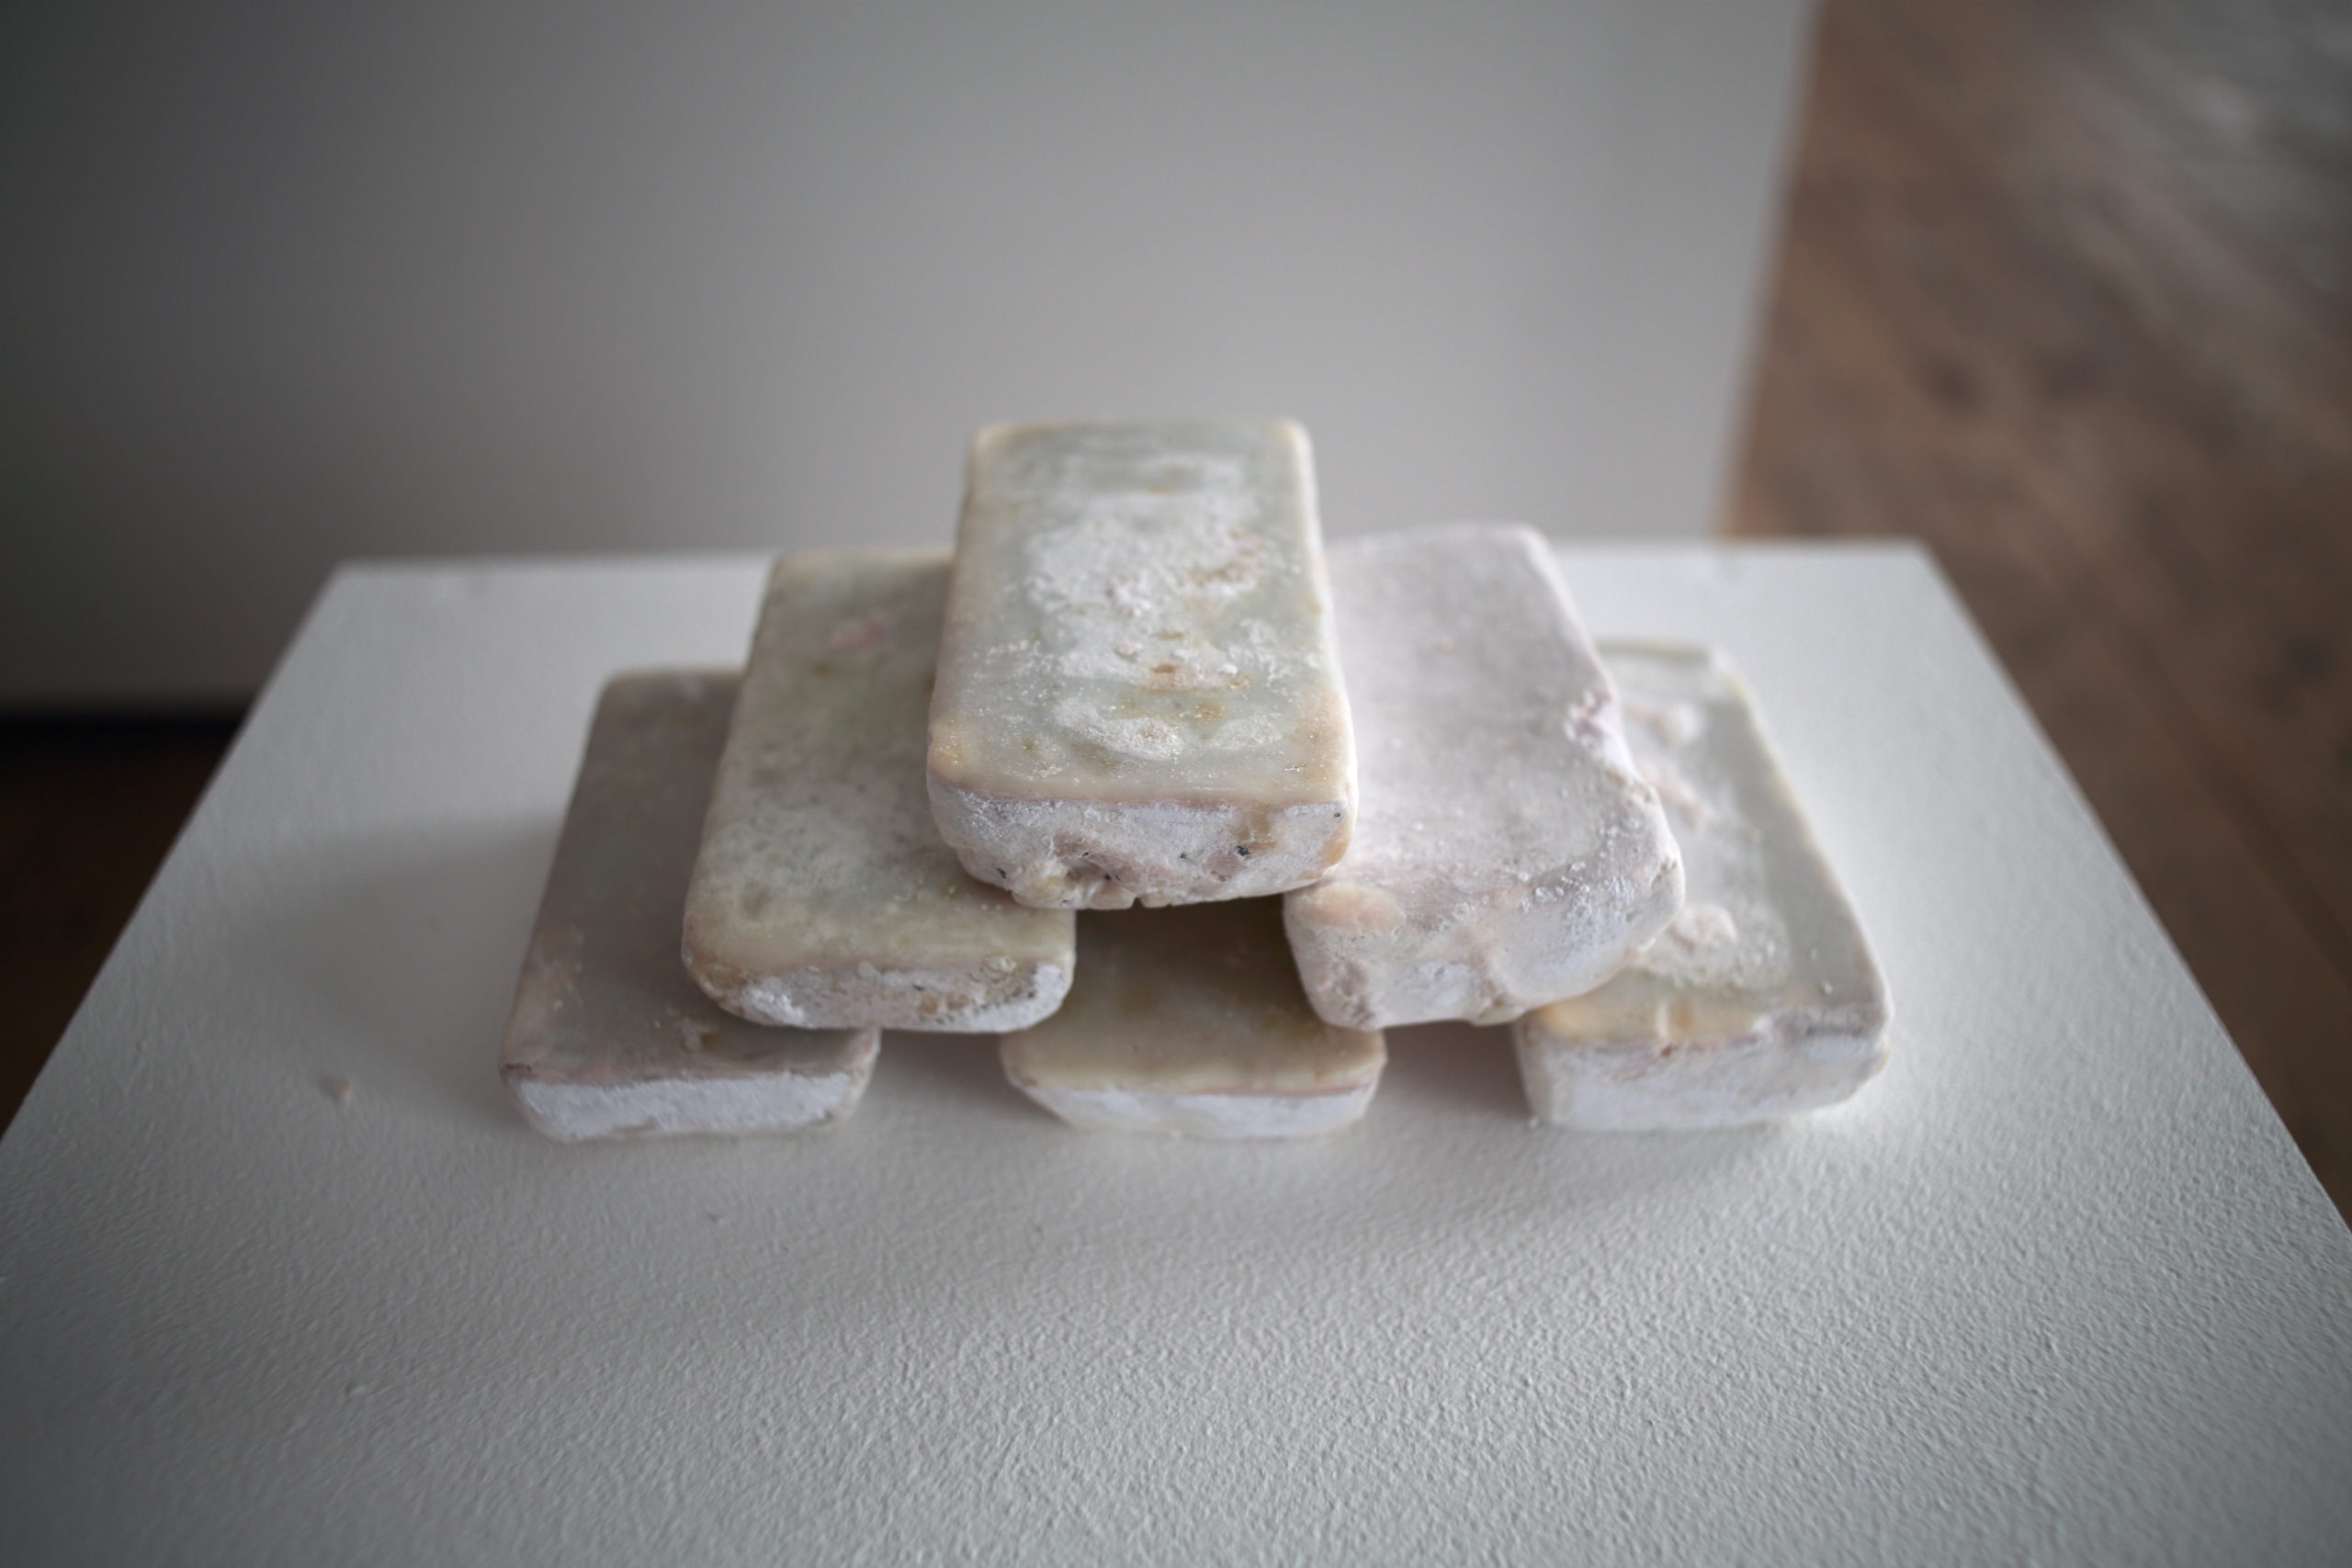 soaps made of fat from run-over canines are displayed against a white surface.